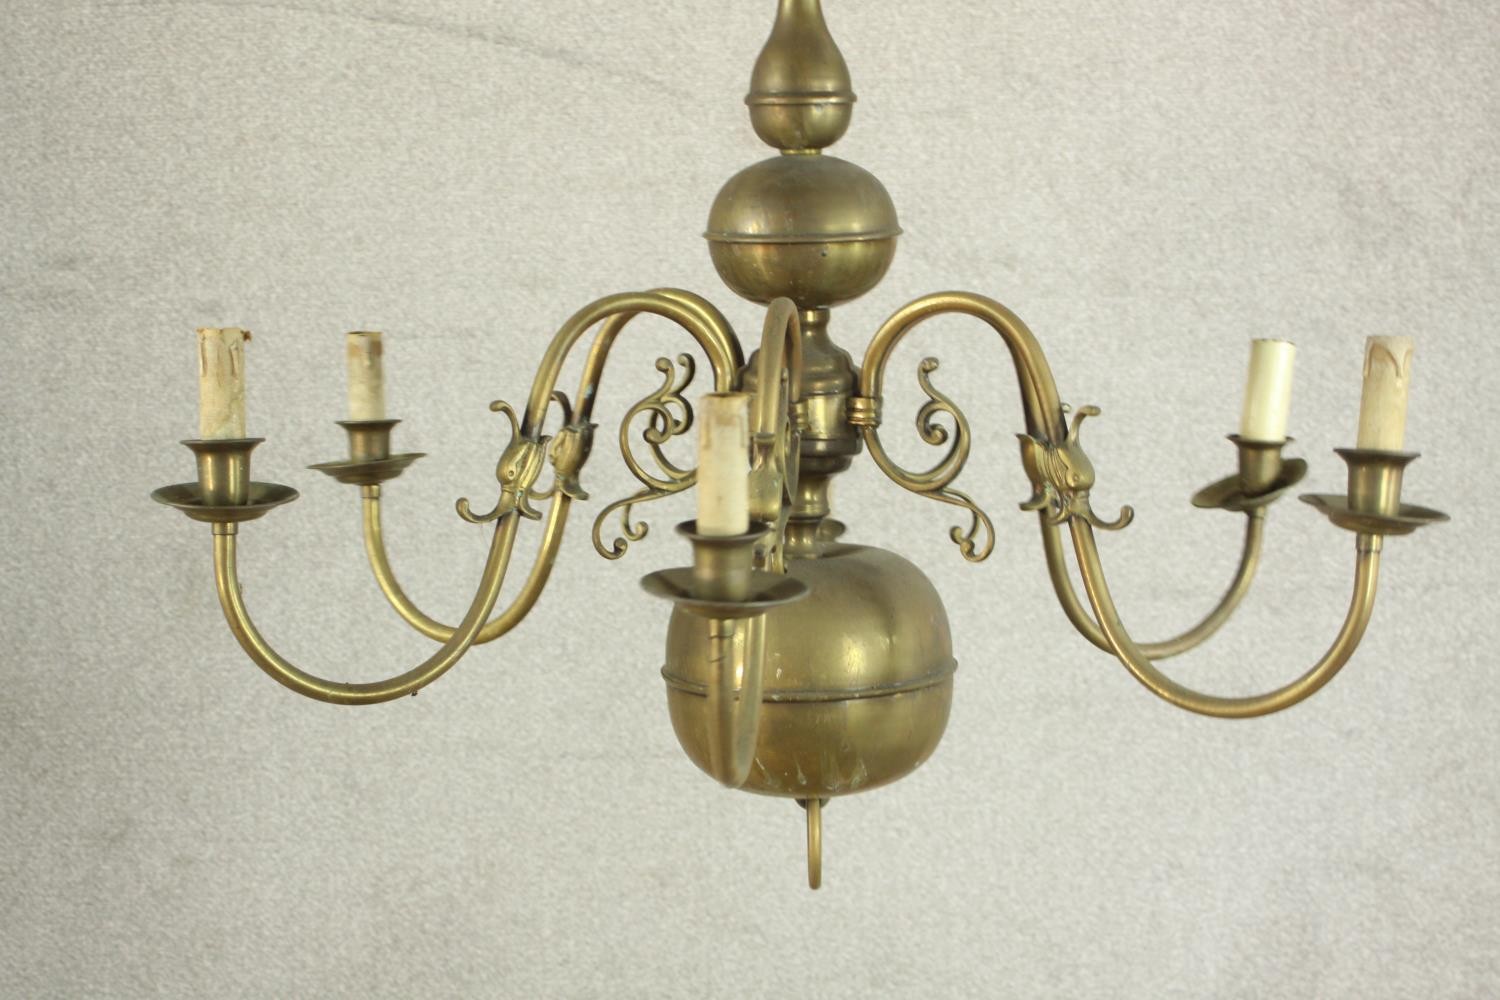 A 20th century Dutch style six branch brass chandelier with scroll arms. Damaged. H.70 Dia.42cm.